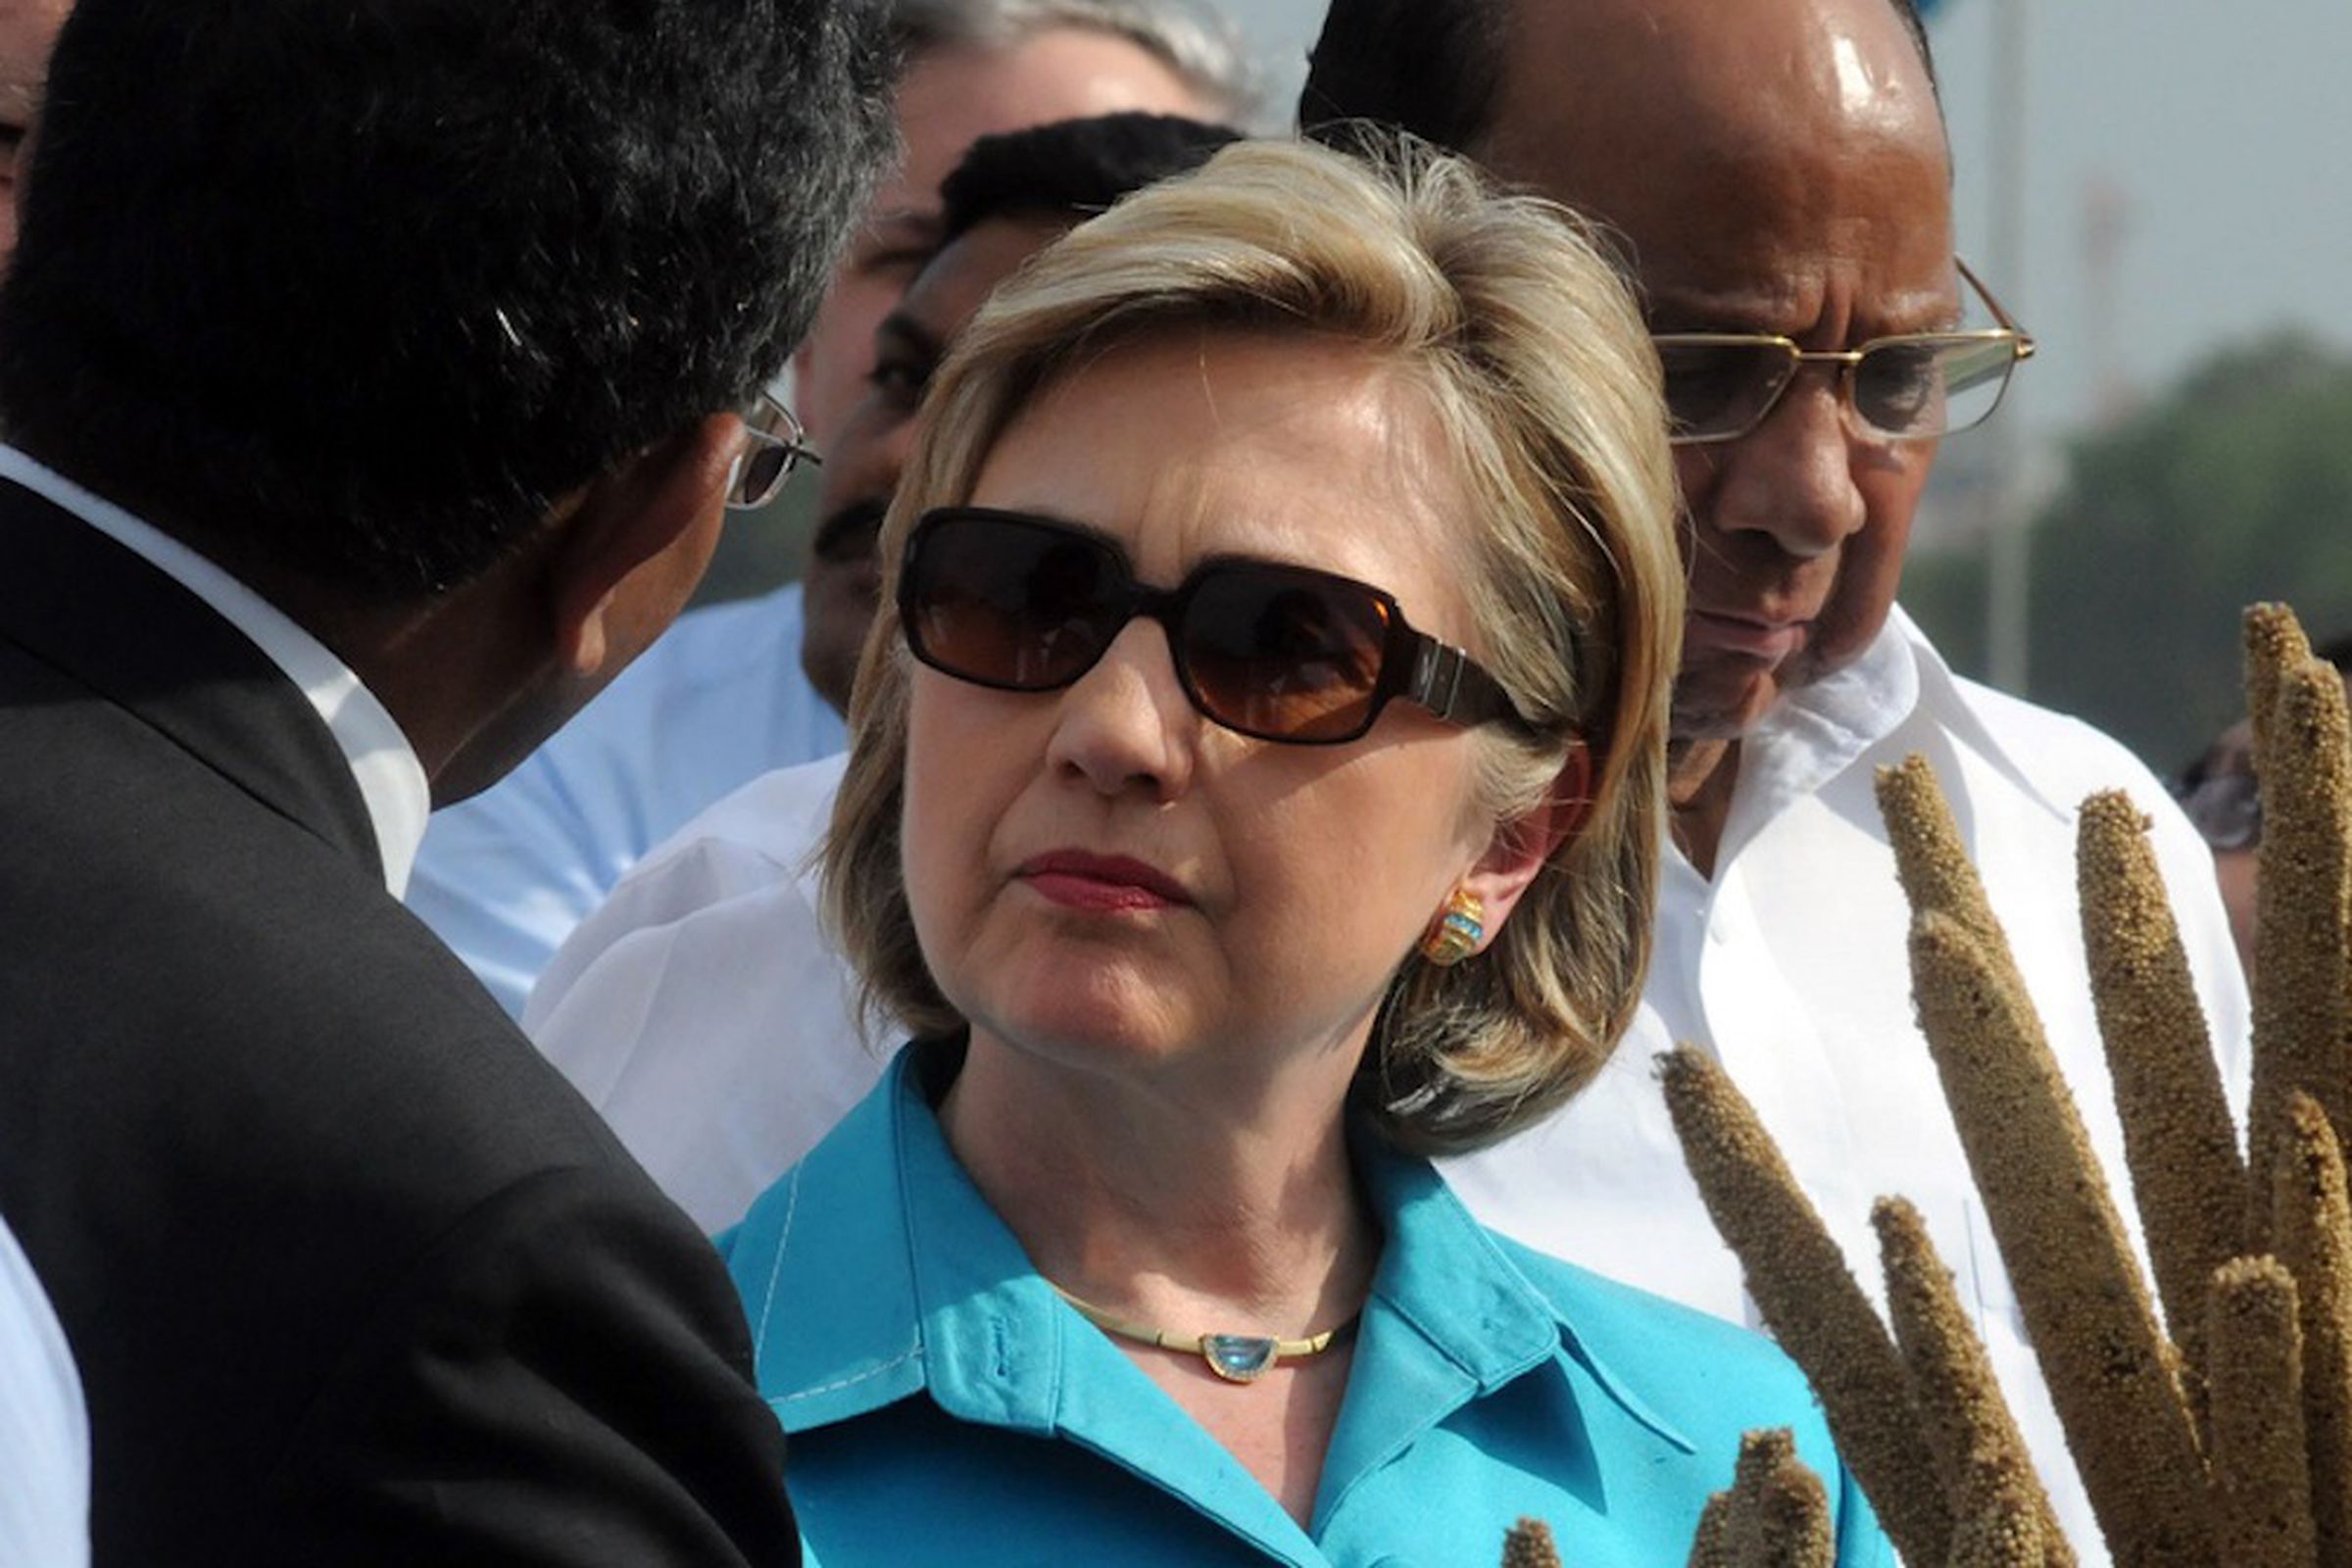 Hillary Clinton wearing sunglasses (Credit: US Department of State/Flickr)